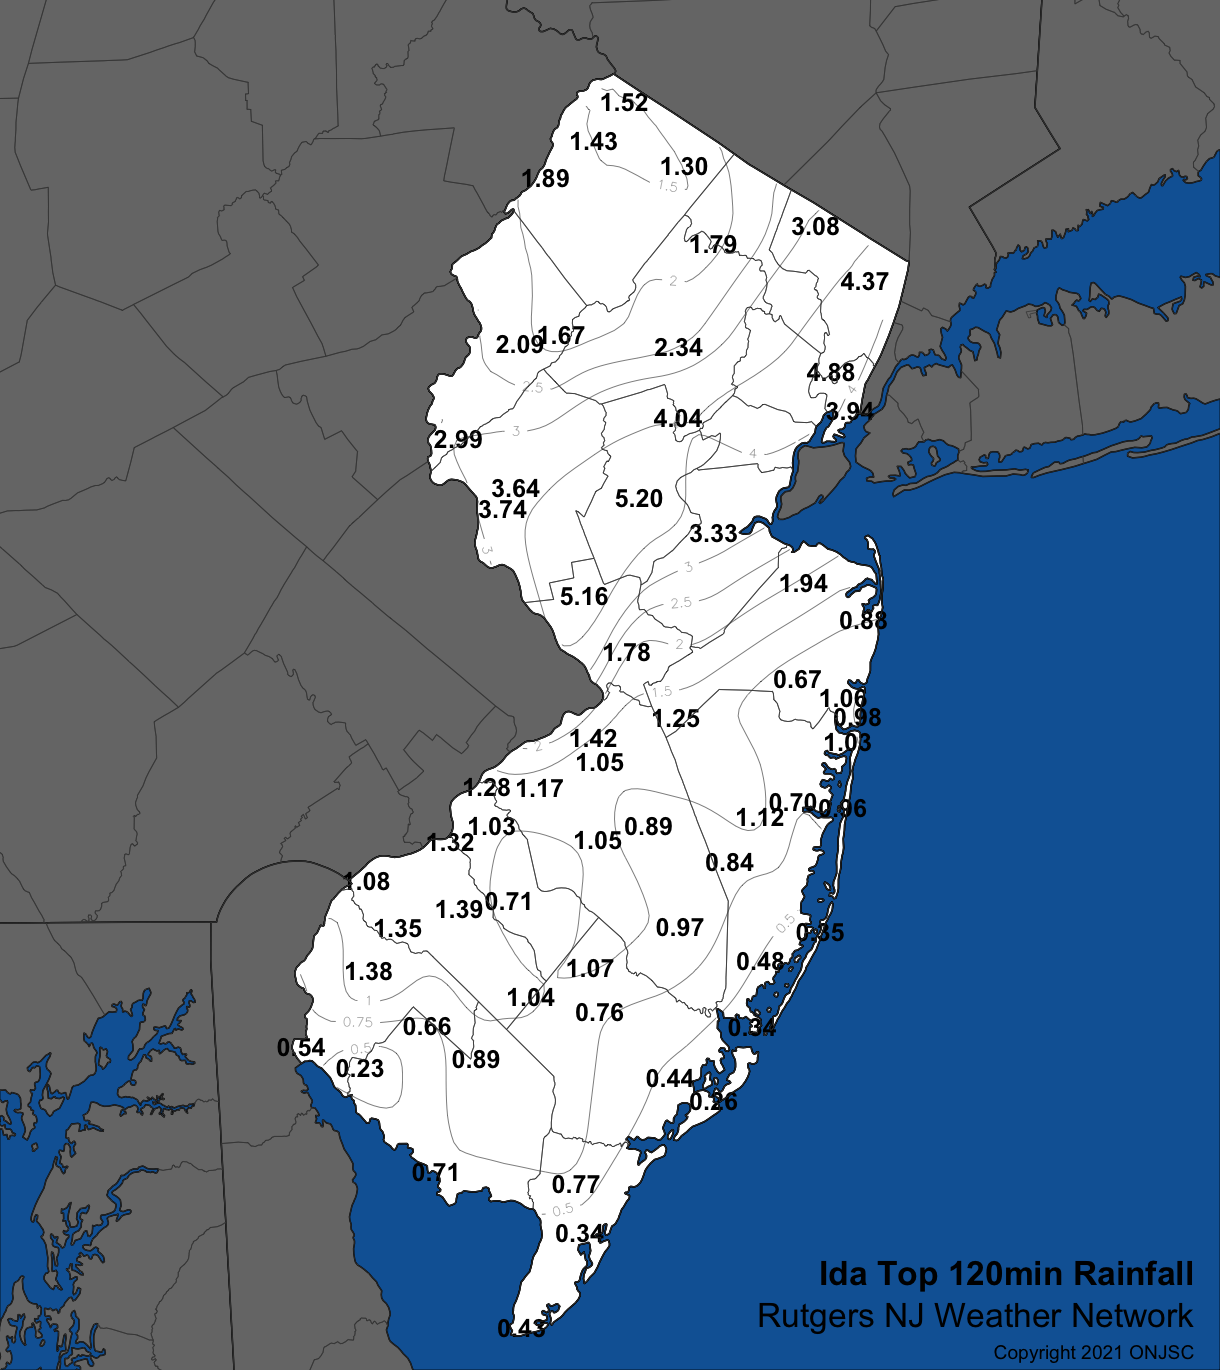 Peak two-hour rainfall across NJ based on observations from Rutgers NJWxNet stations and the Newark Airport NWS station.